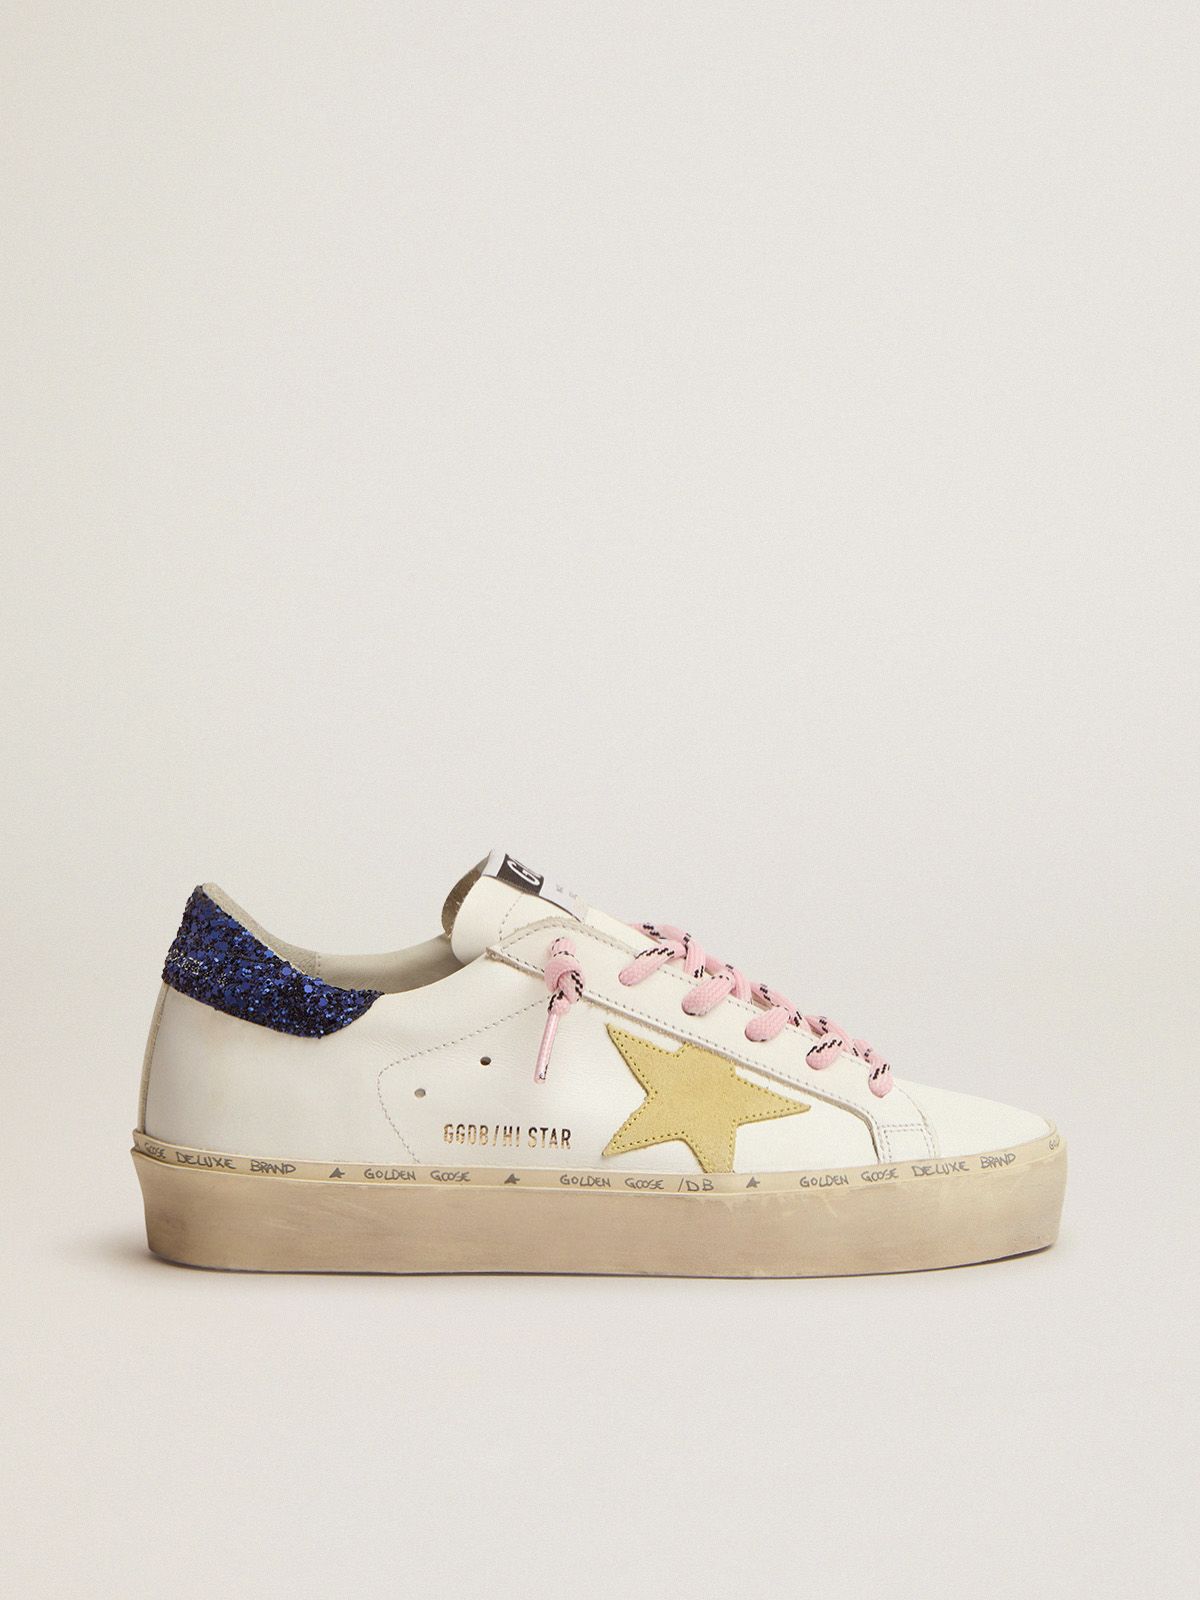 golden goose Hi LTD star tab heel Star yellow with blue suede sneakers glitter and